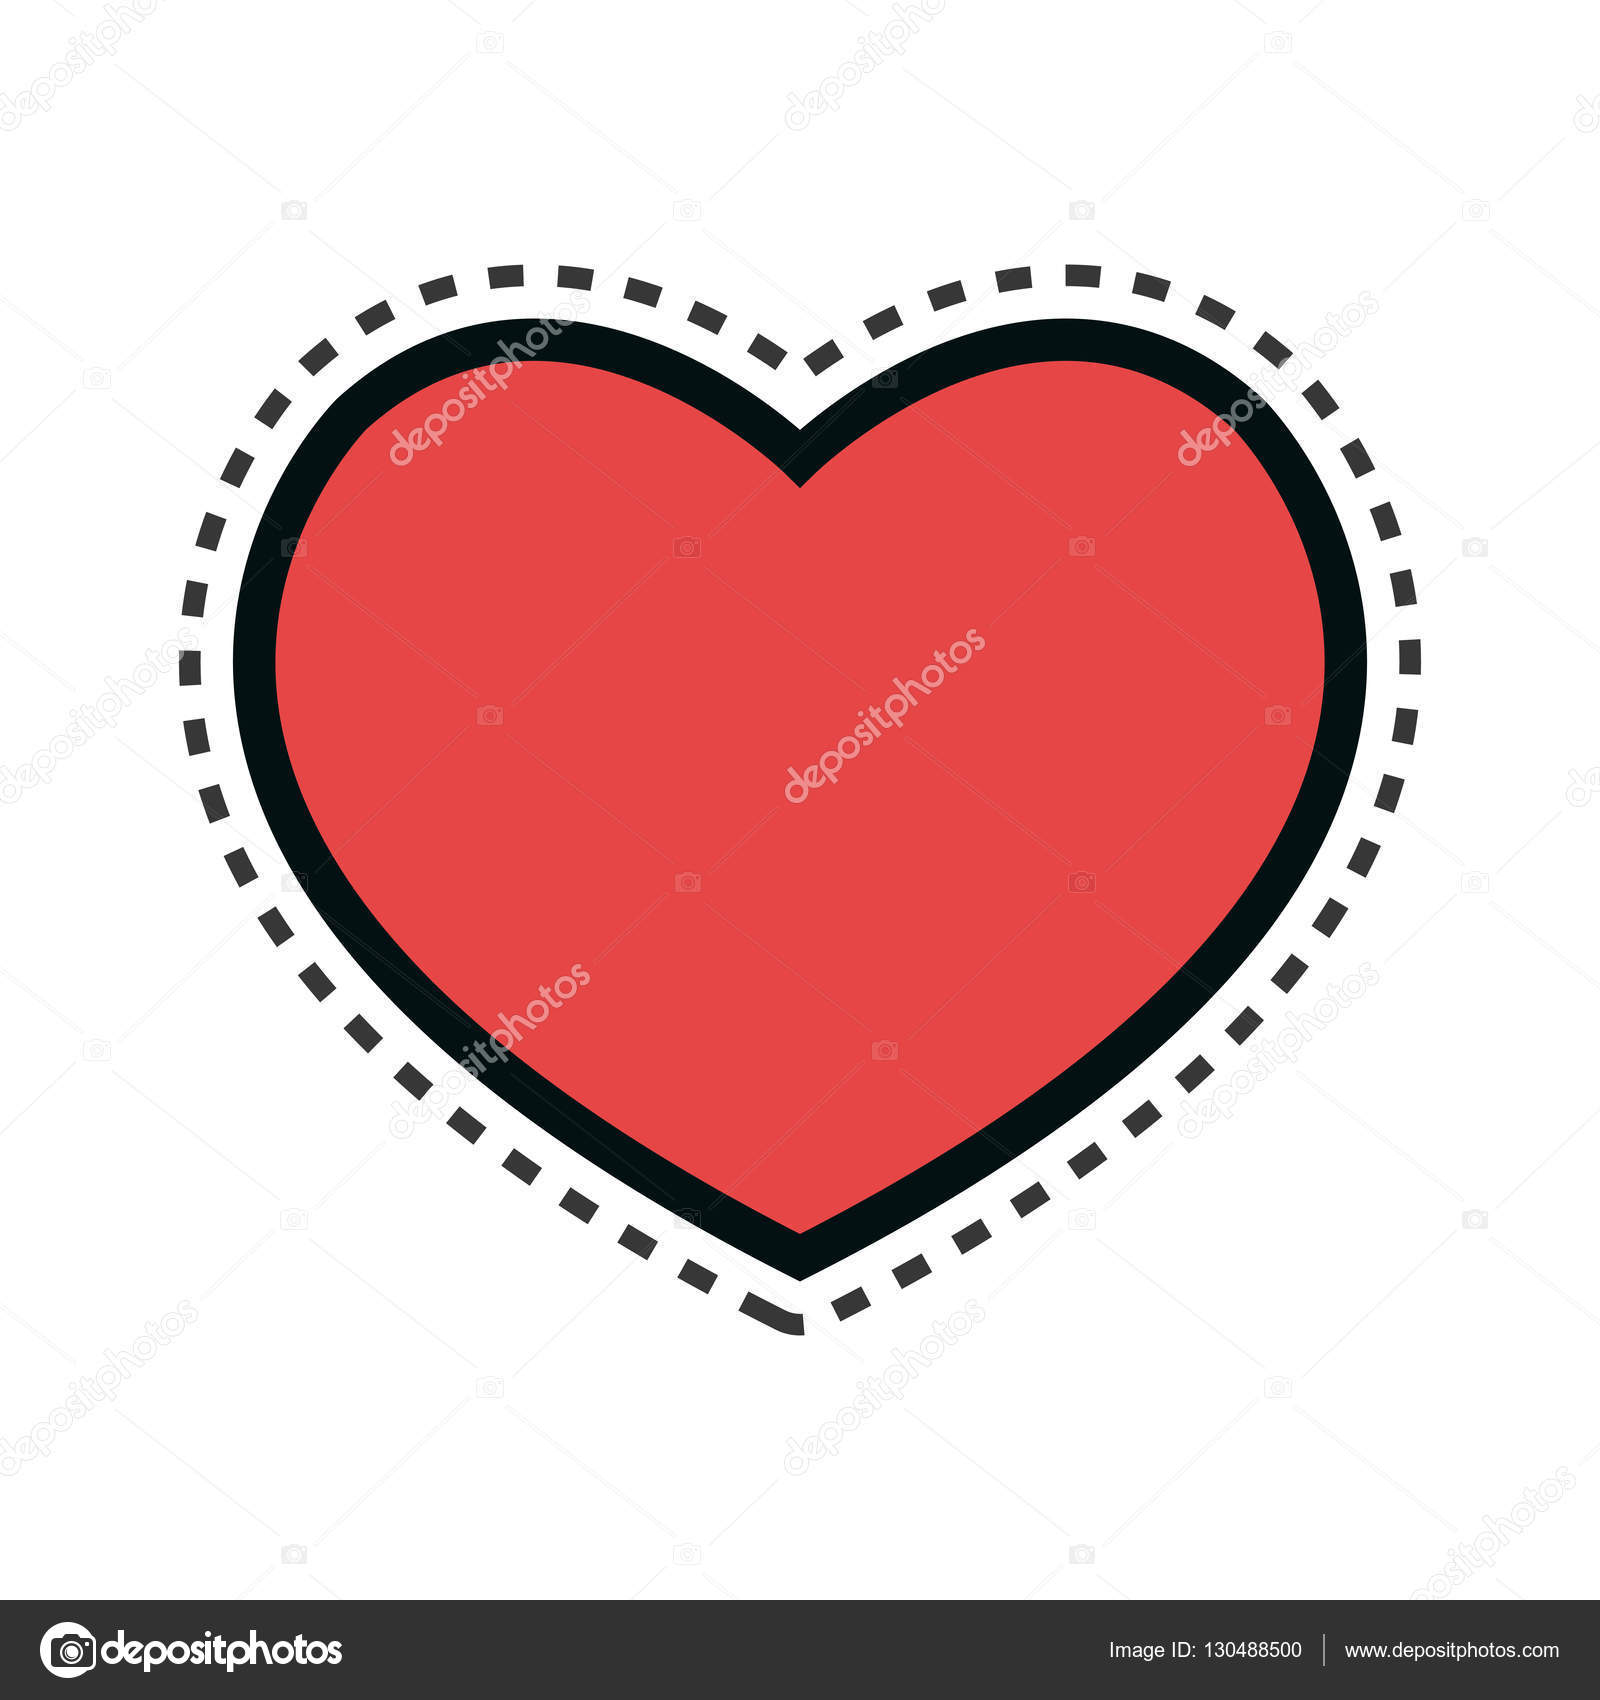 Red heart shape, isolated flat icon vector illustration graphic.